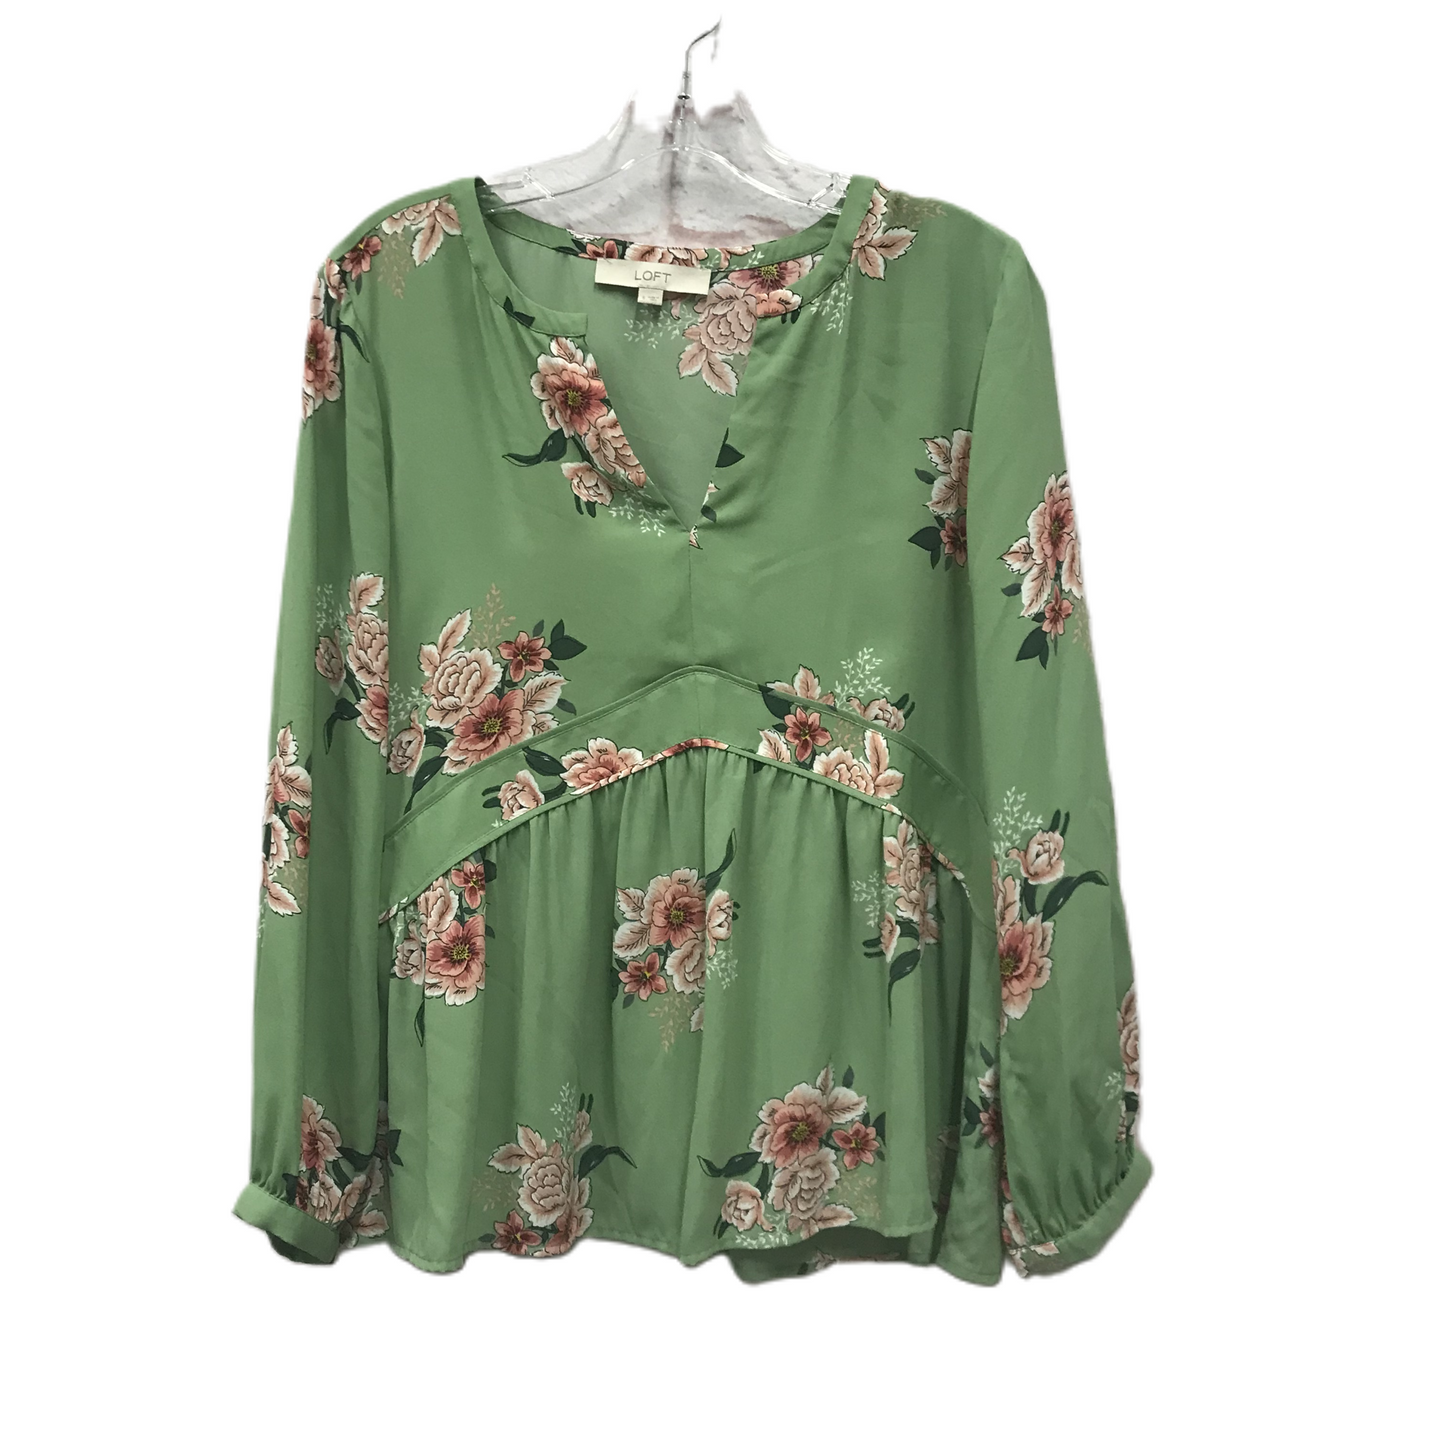 Green Top Long Sleeve By Loft, Size: S